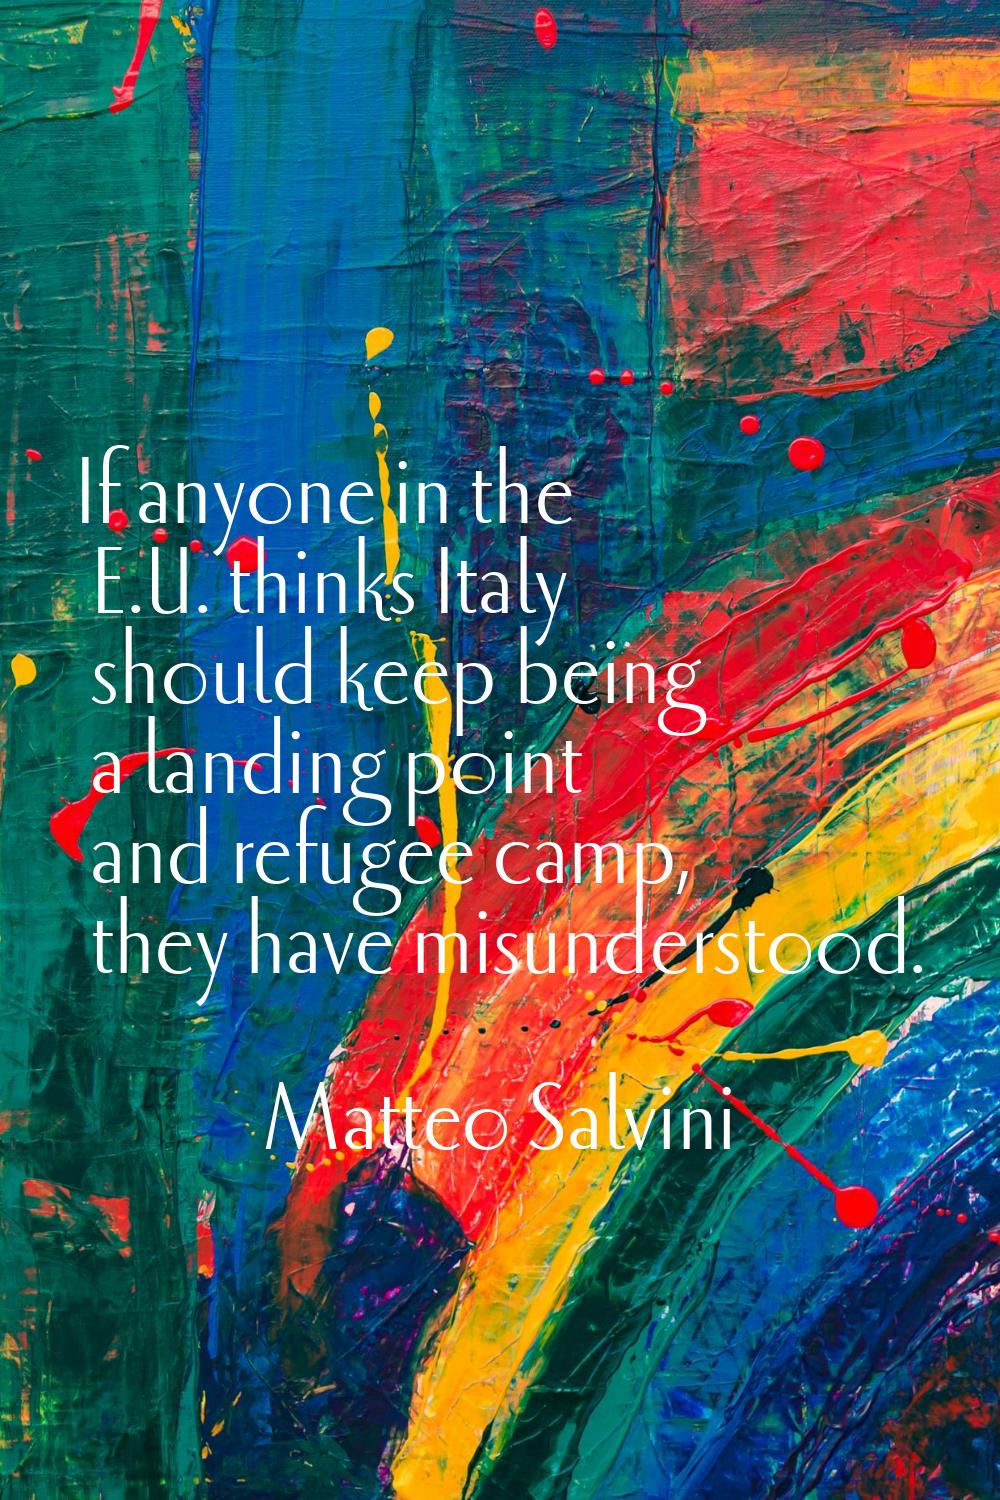 If anyone in the E.U. thinks Italy should keep being a landing point and refugee camp, they have mi